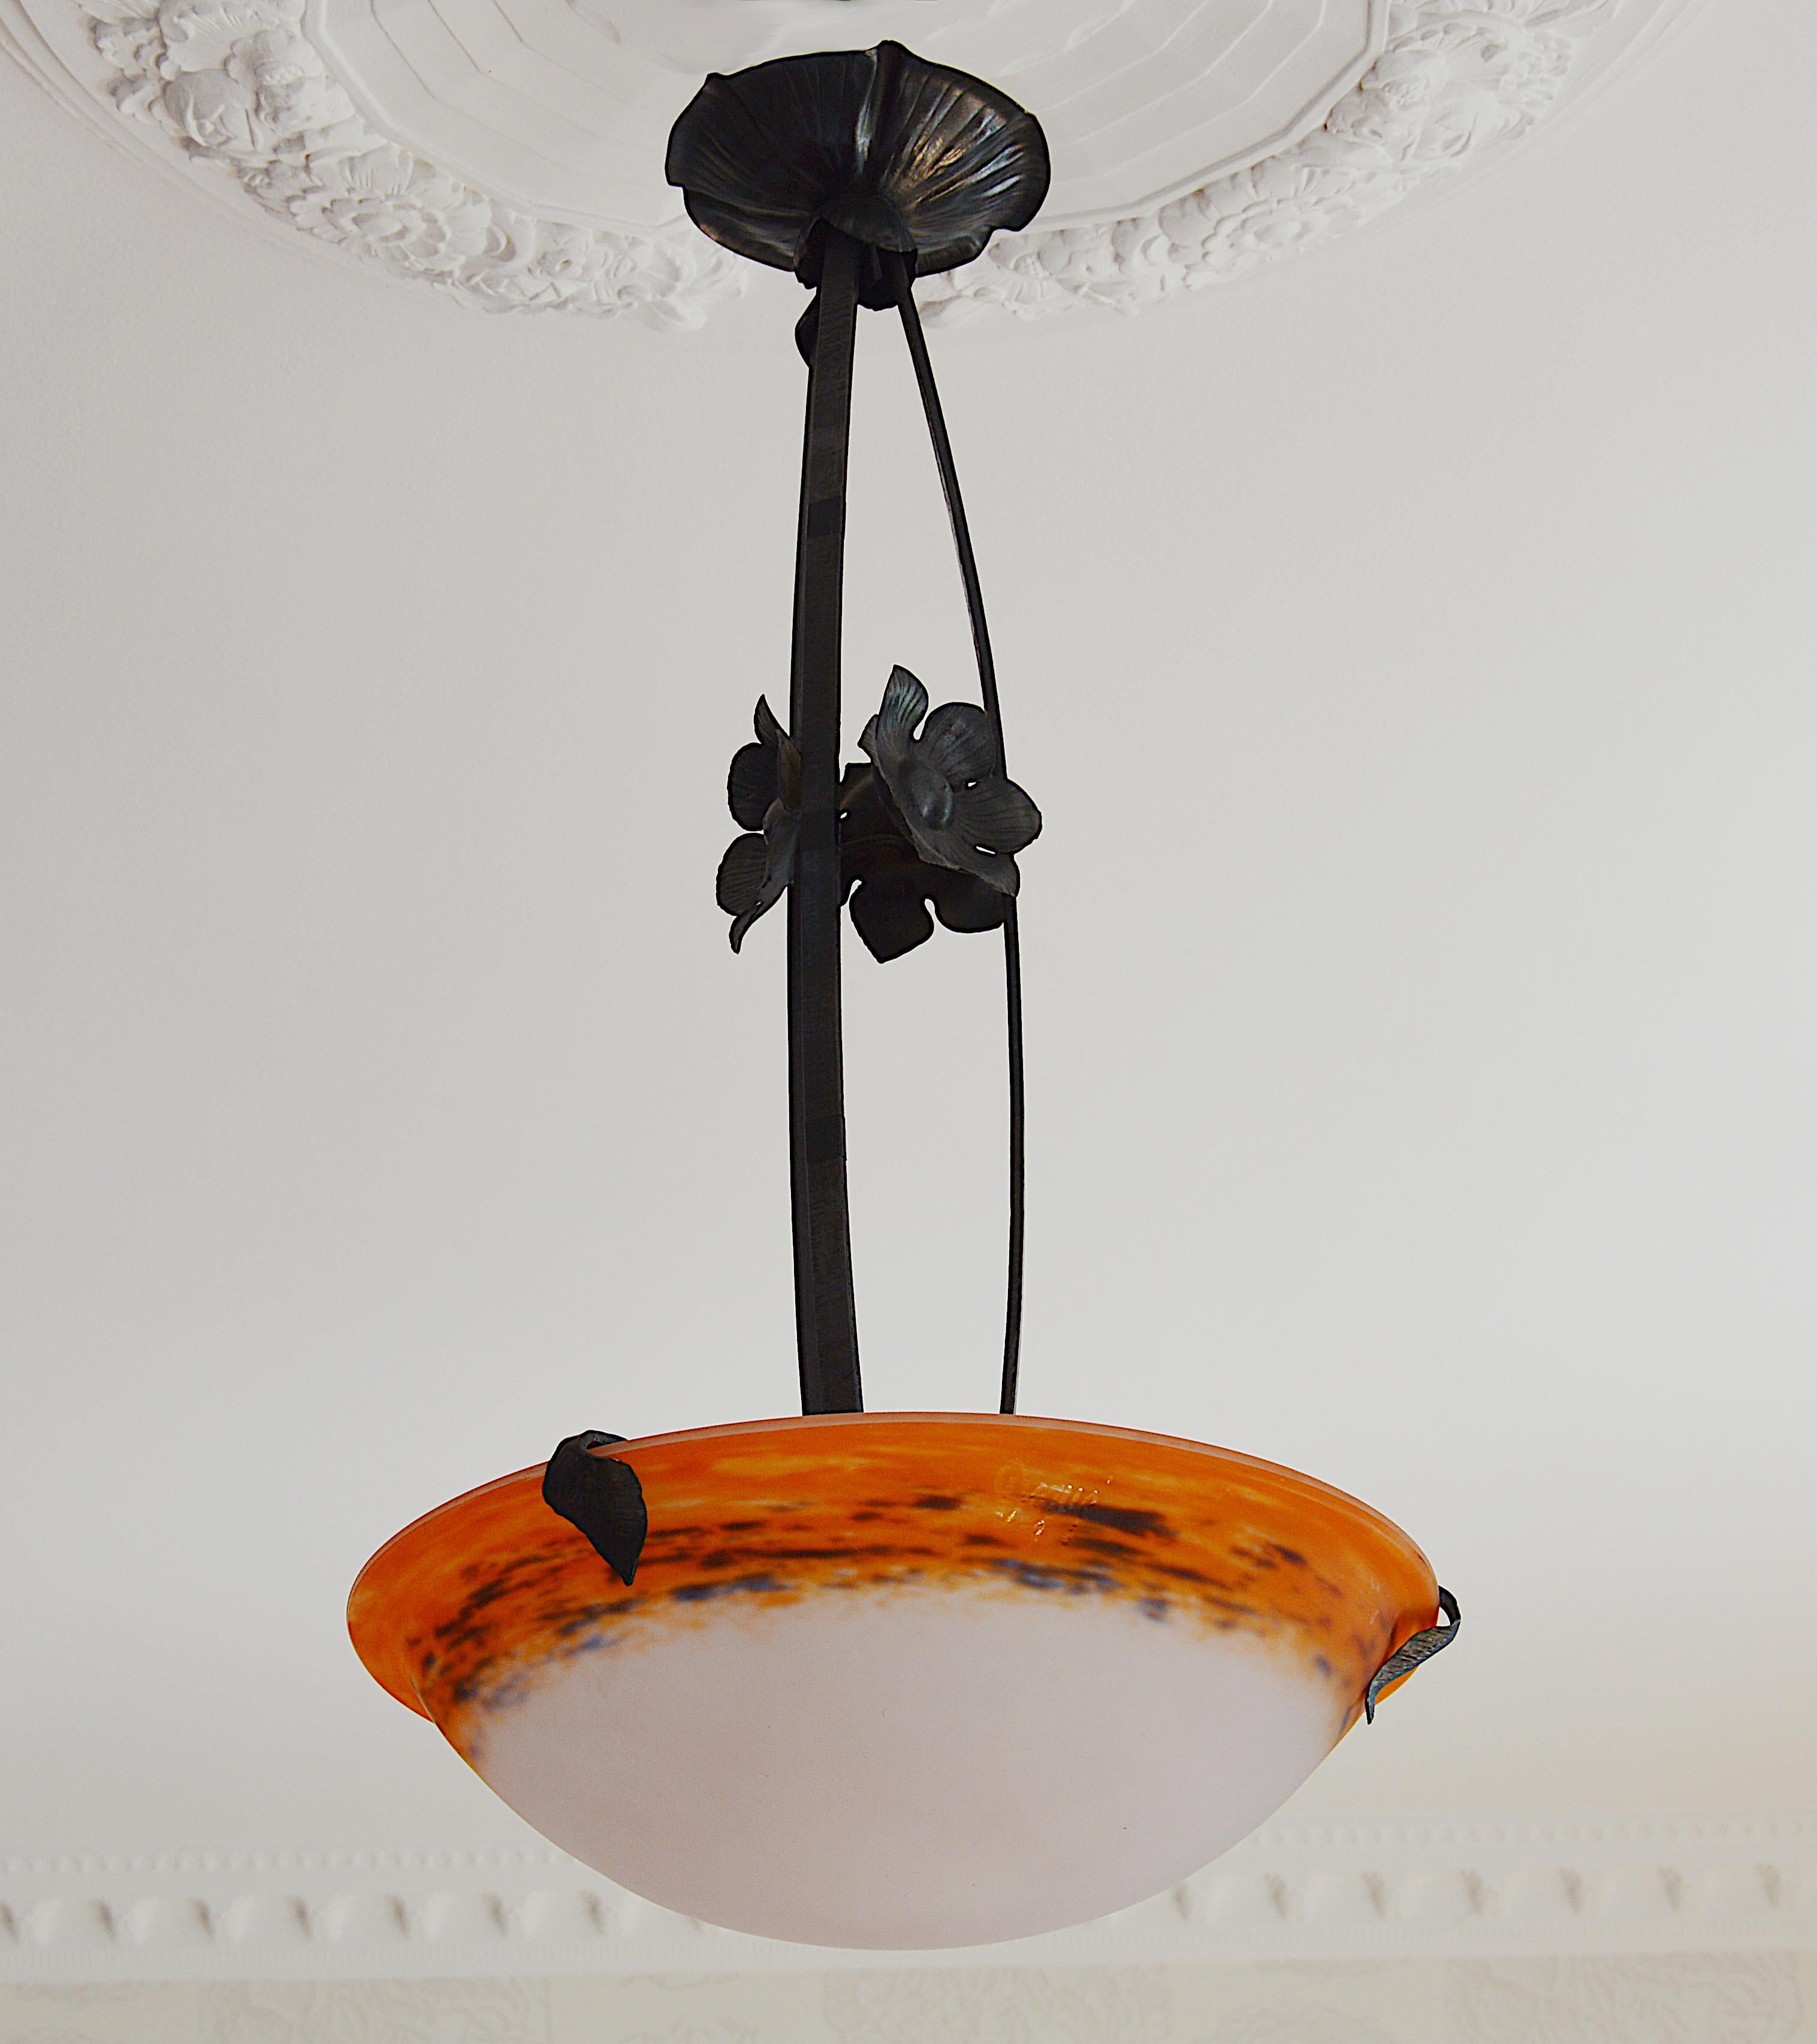 French Art Deco pendant by Degue, Compiegne, France, late 1920s. Mottled glass shade, powders are applied between two layers, that comes hung at its original wrought iron fixture. Measures: Height 26